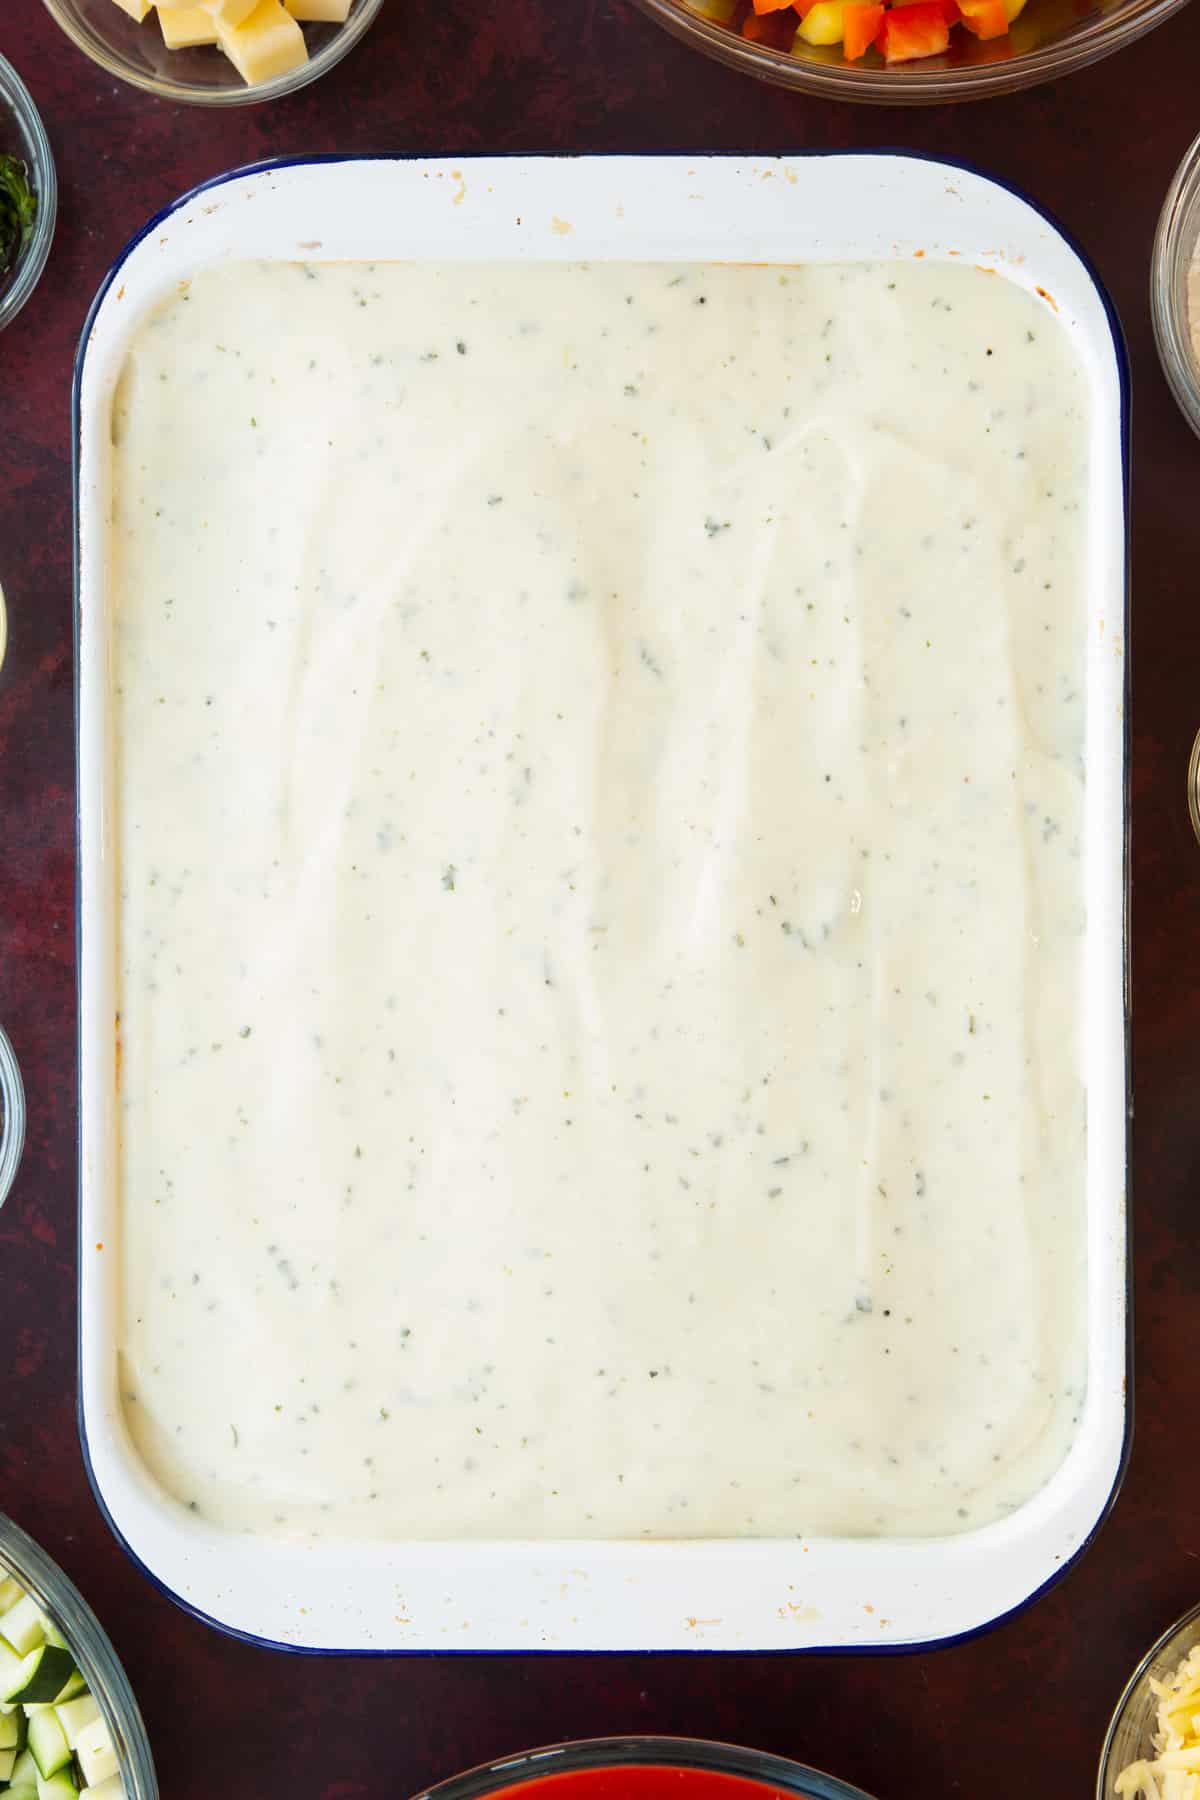 Overhead shot of the white / cheese sauce layered ontop of the potatoes in a tray.